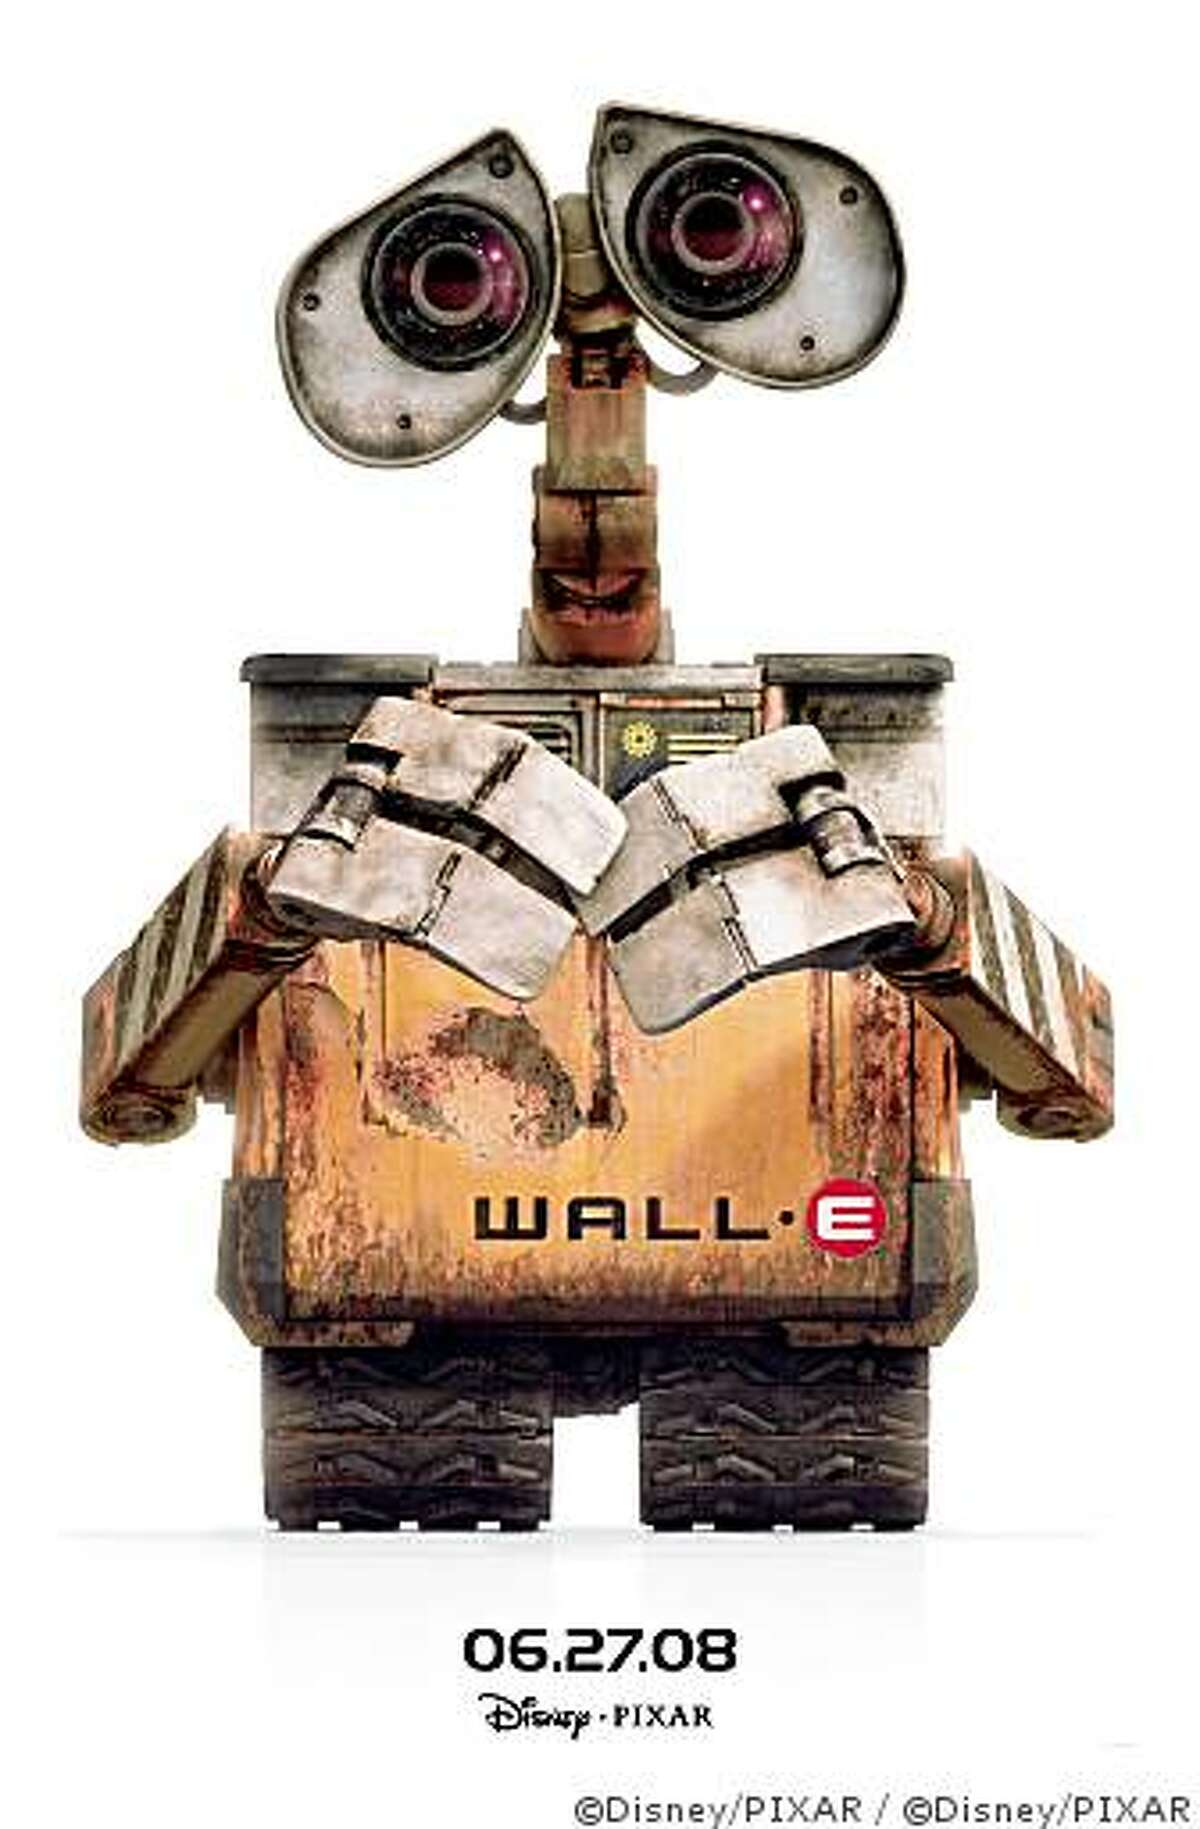 Disney/PIXAR�s animated feature, �Wall-E� is the story of one robot�s comic adventures as he chases his dream across the galaxy.